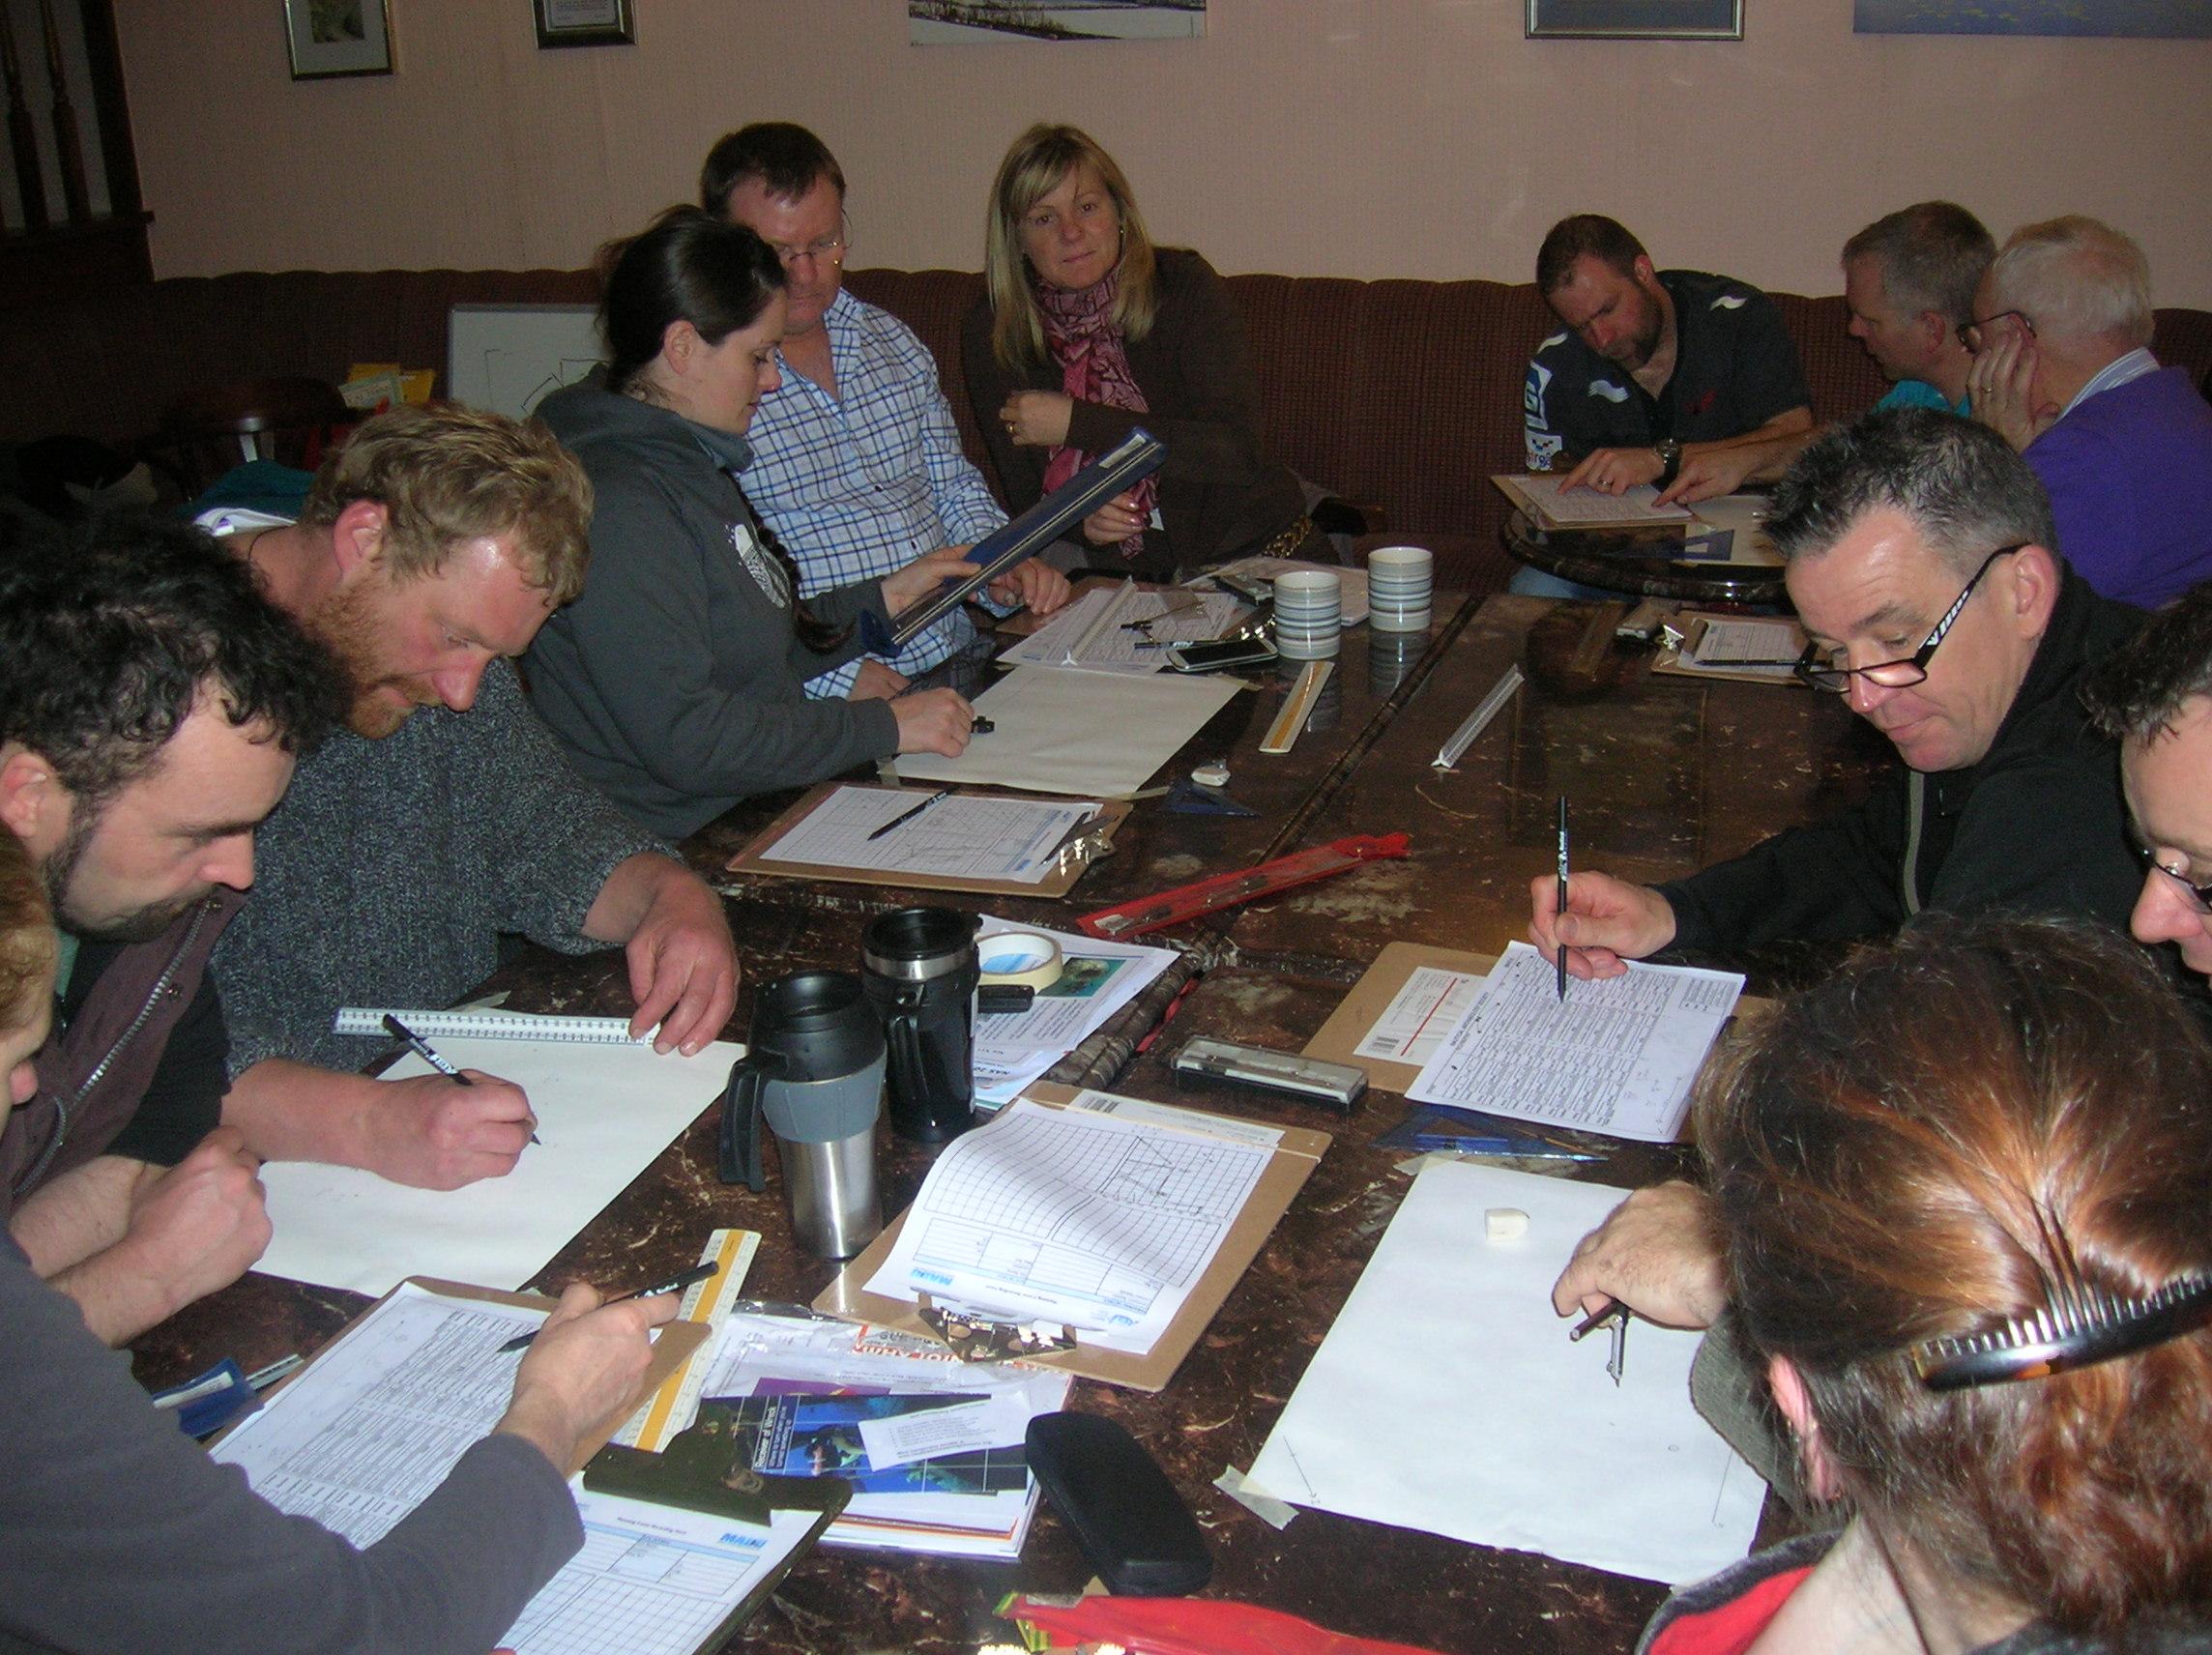 Members of the Ammanford BSAC drawing up their survey results during a NAS course